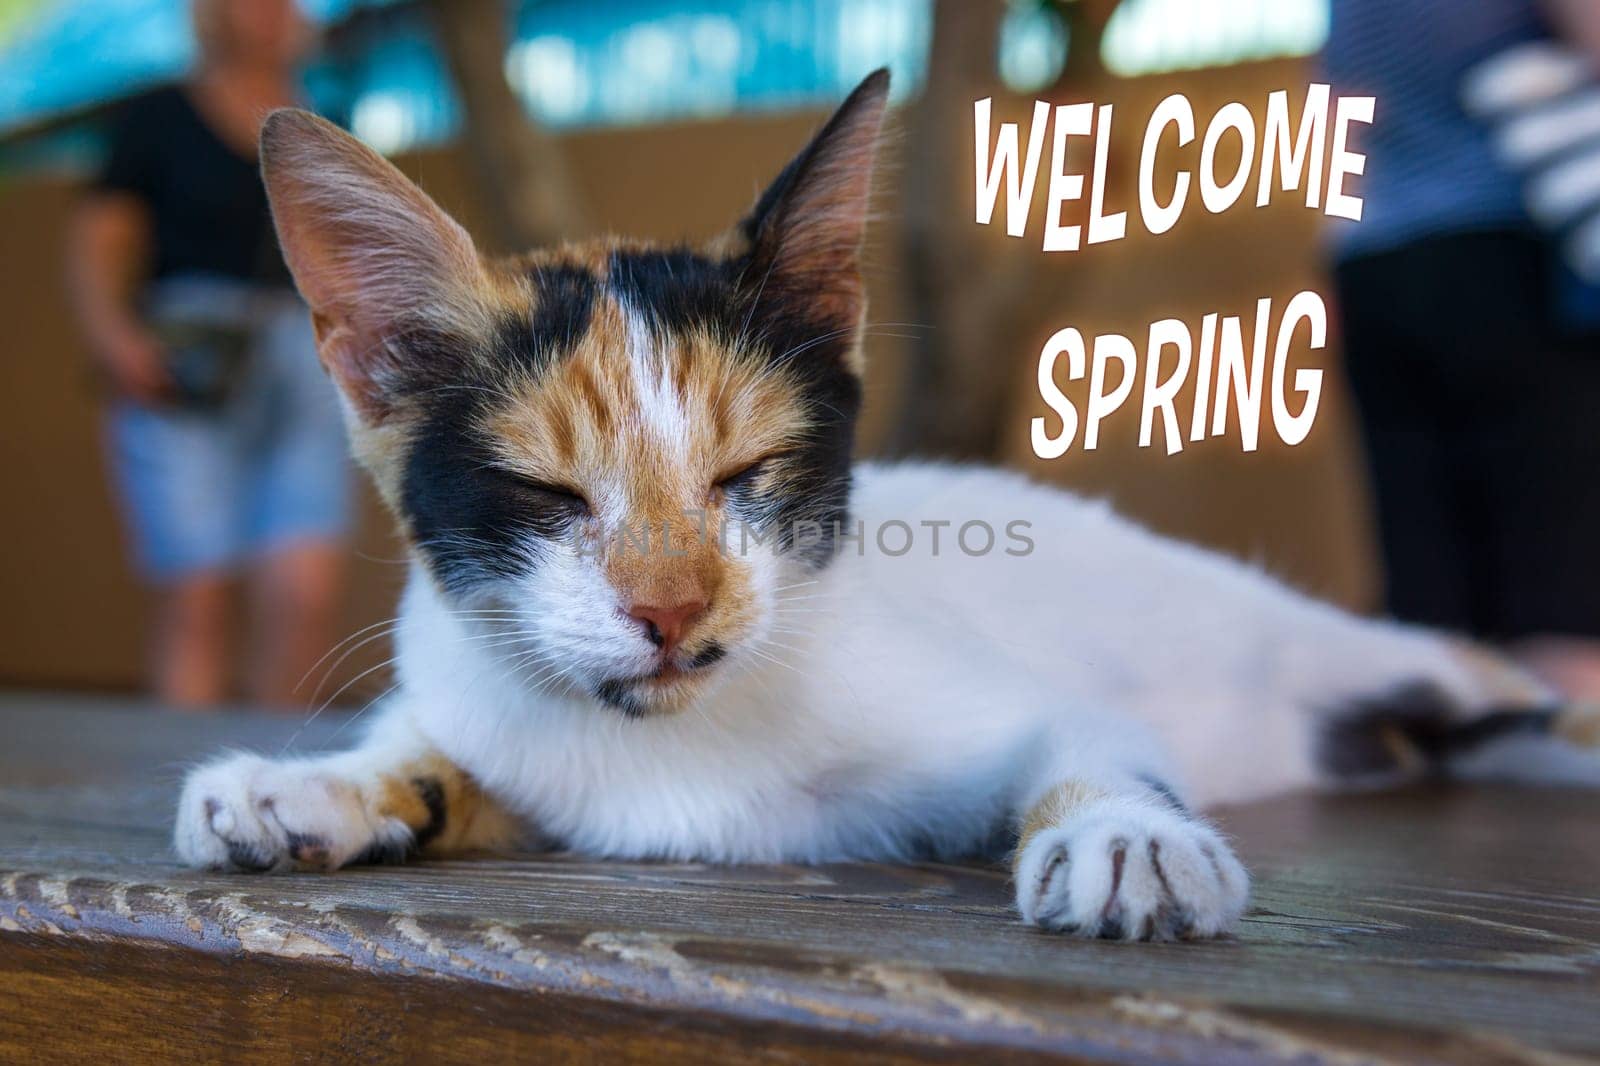 Graceful Feline Resting on a Wooden Surface. Welcome spring by darksoul72